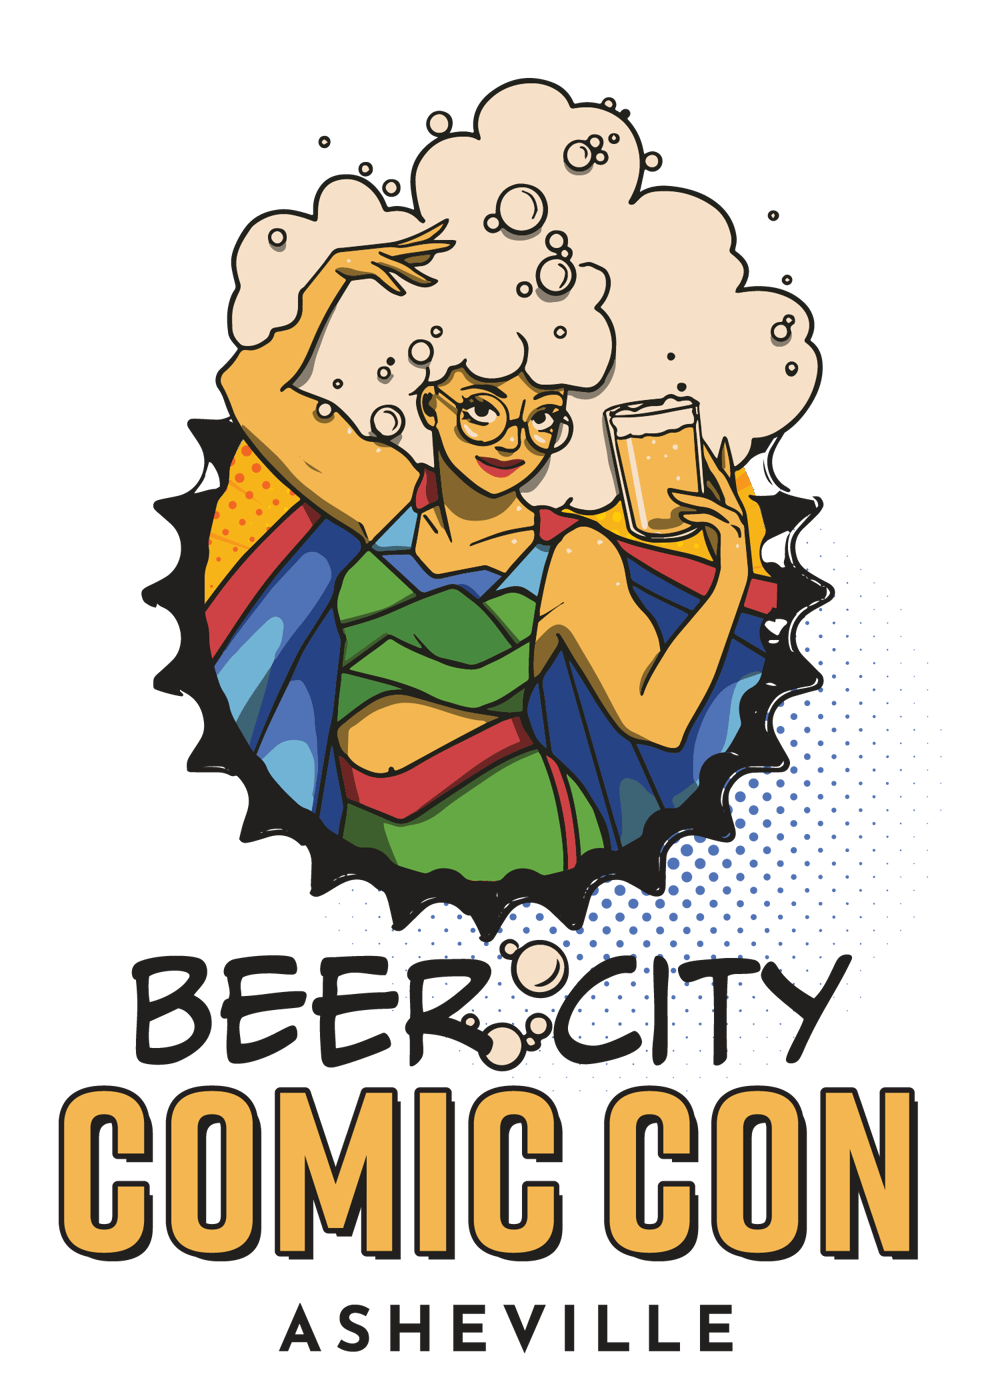 Beer City Comic Con Commission